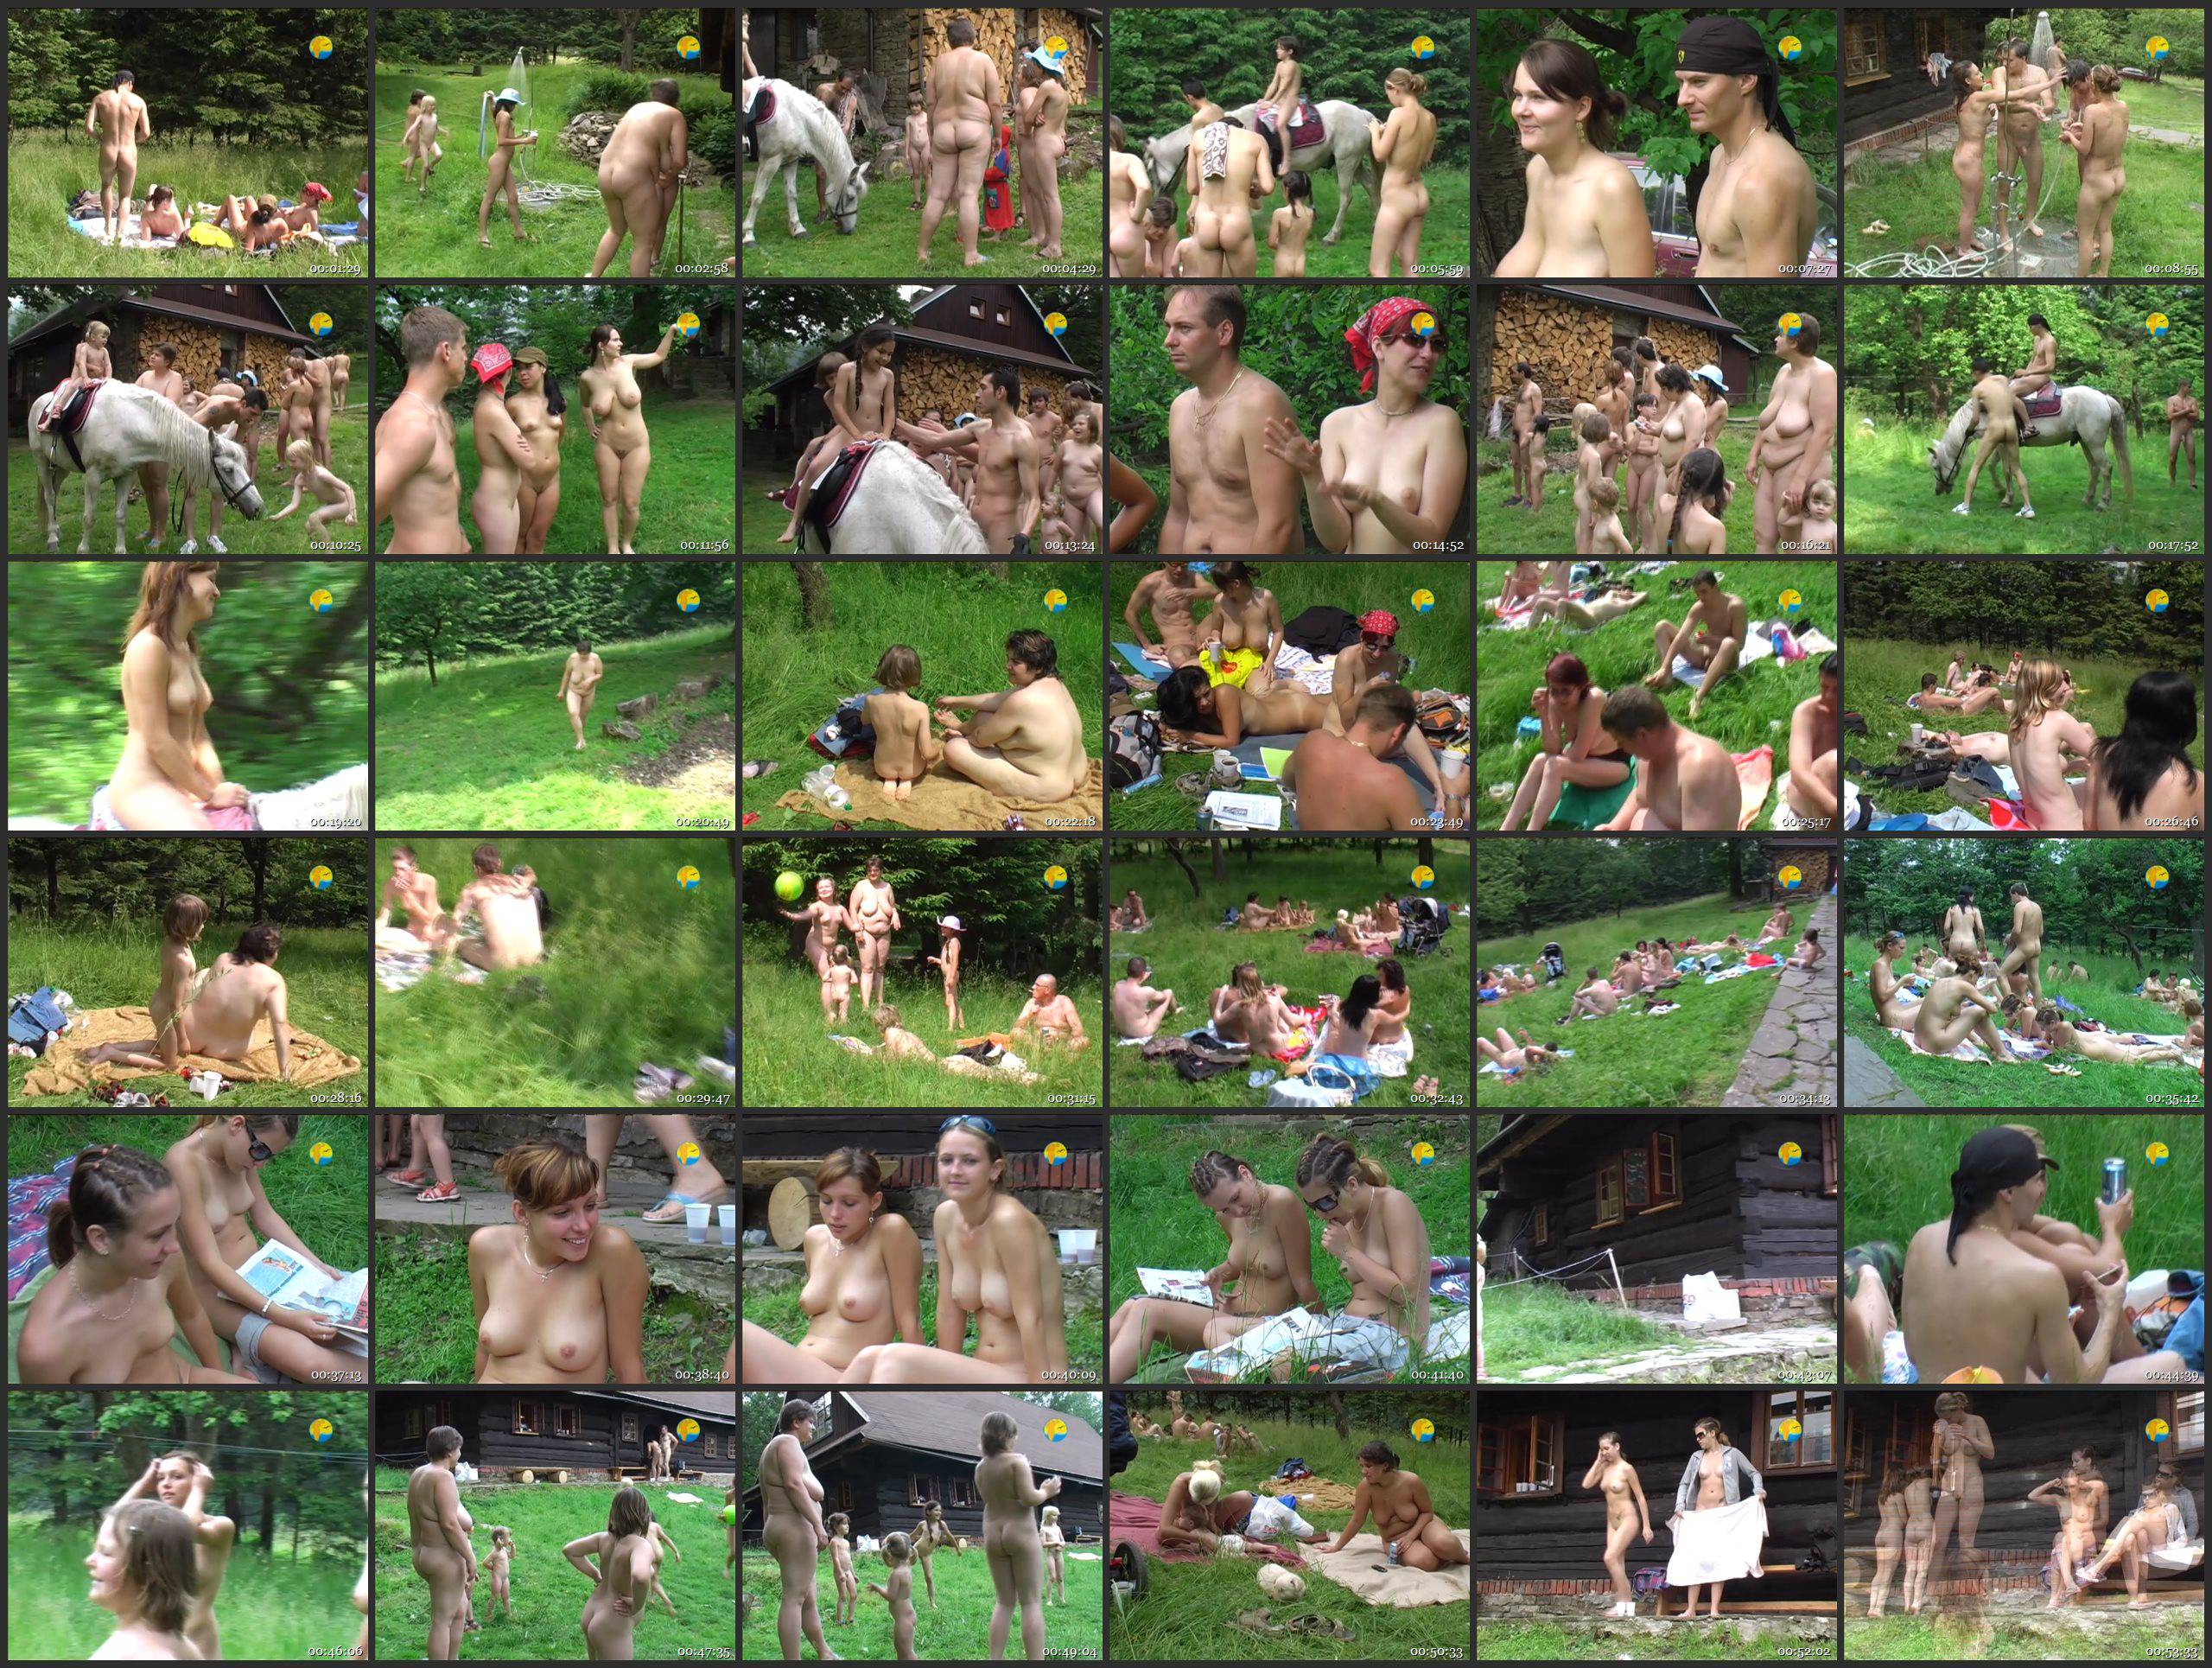 Naturist Freedom Videos-In the Sun - Thumbnails